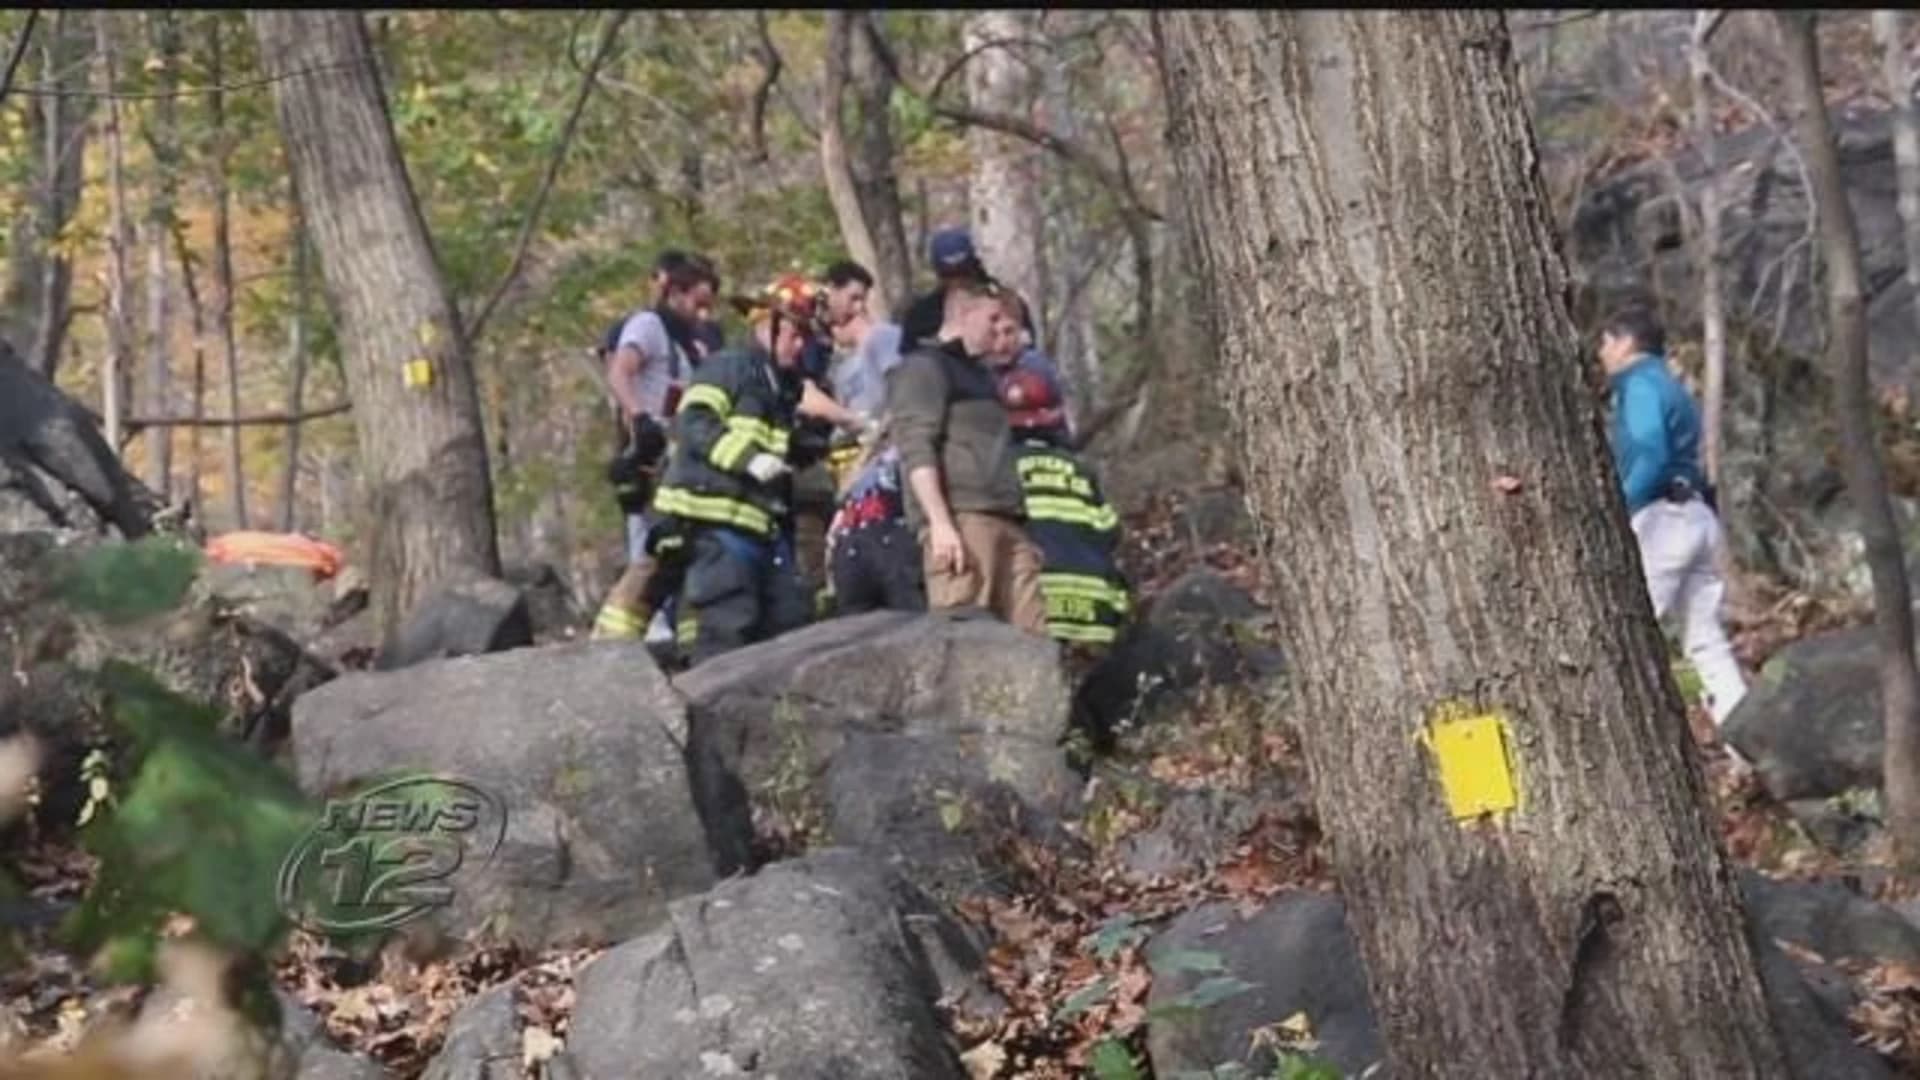 Hiker injured after falling from cliff in Suffern